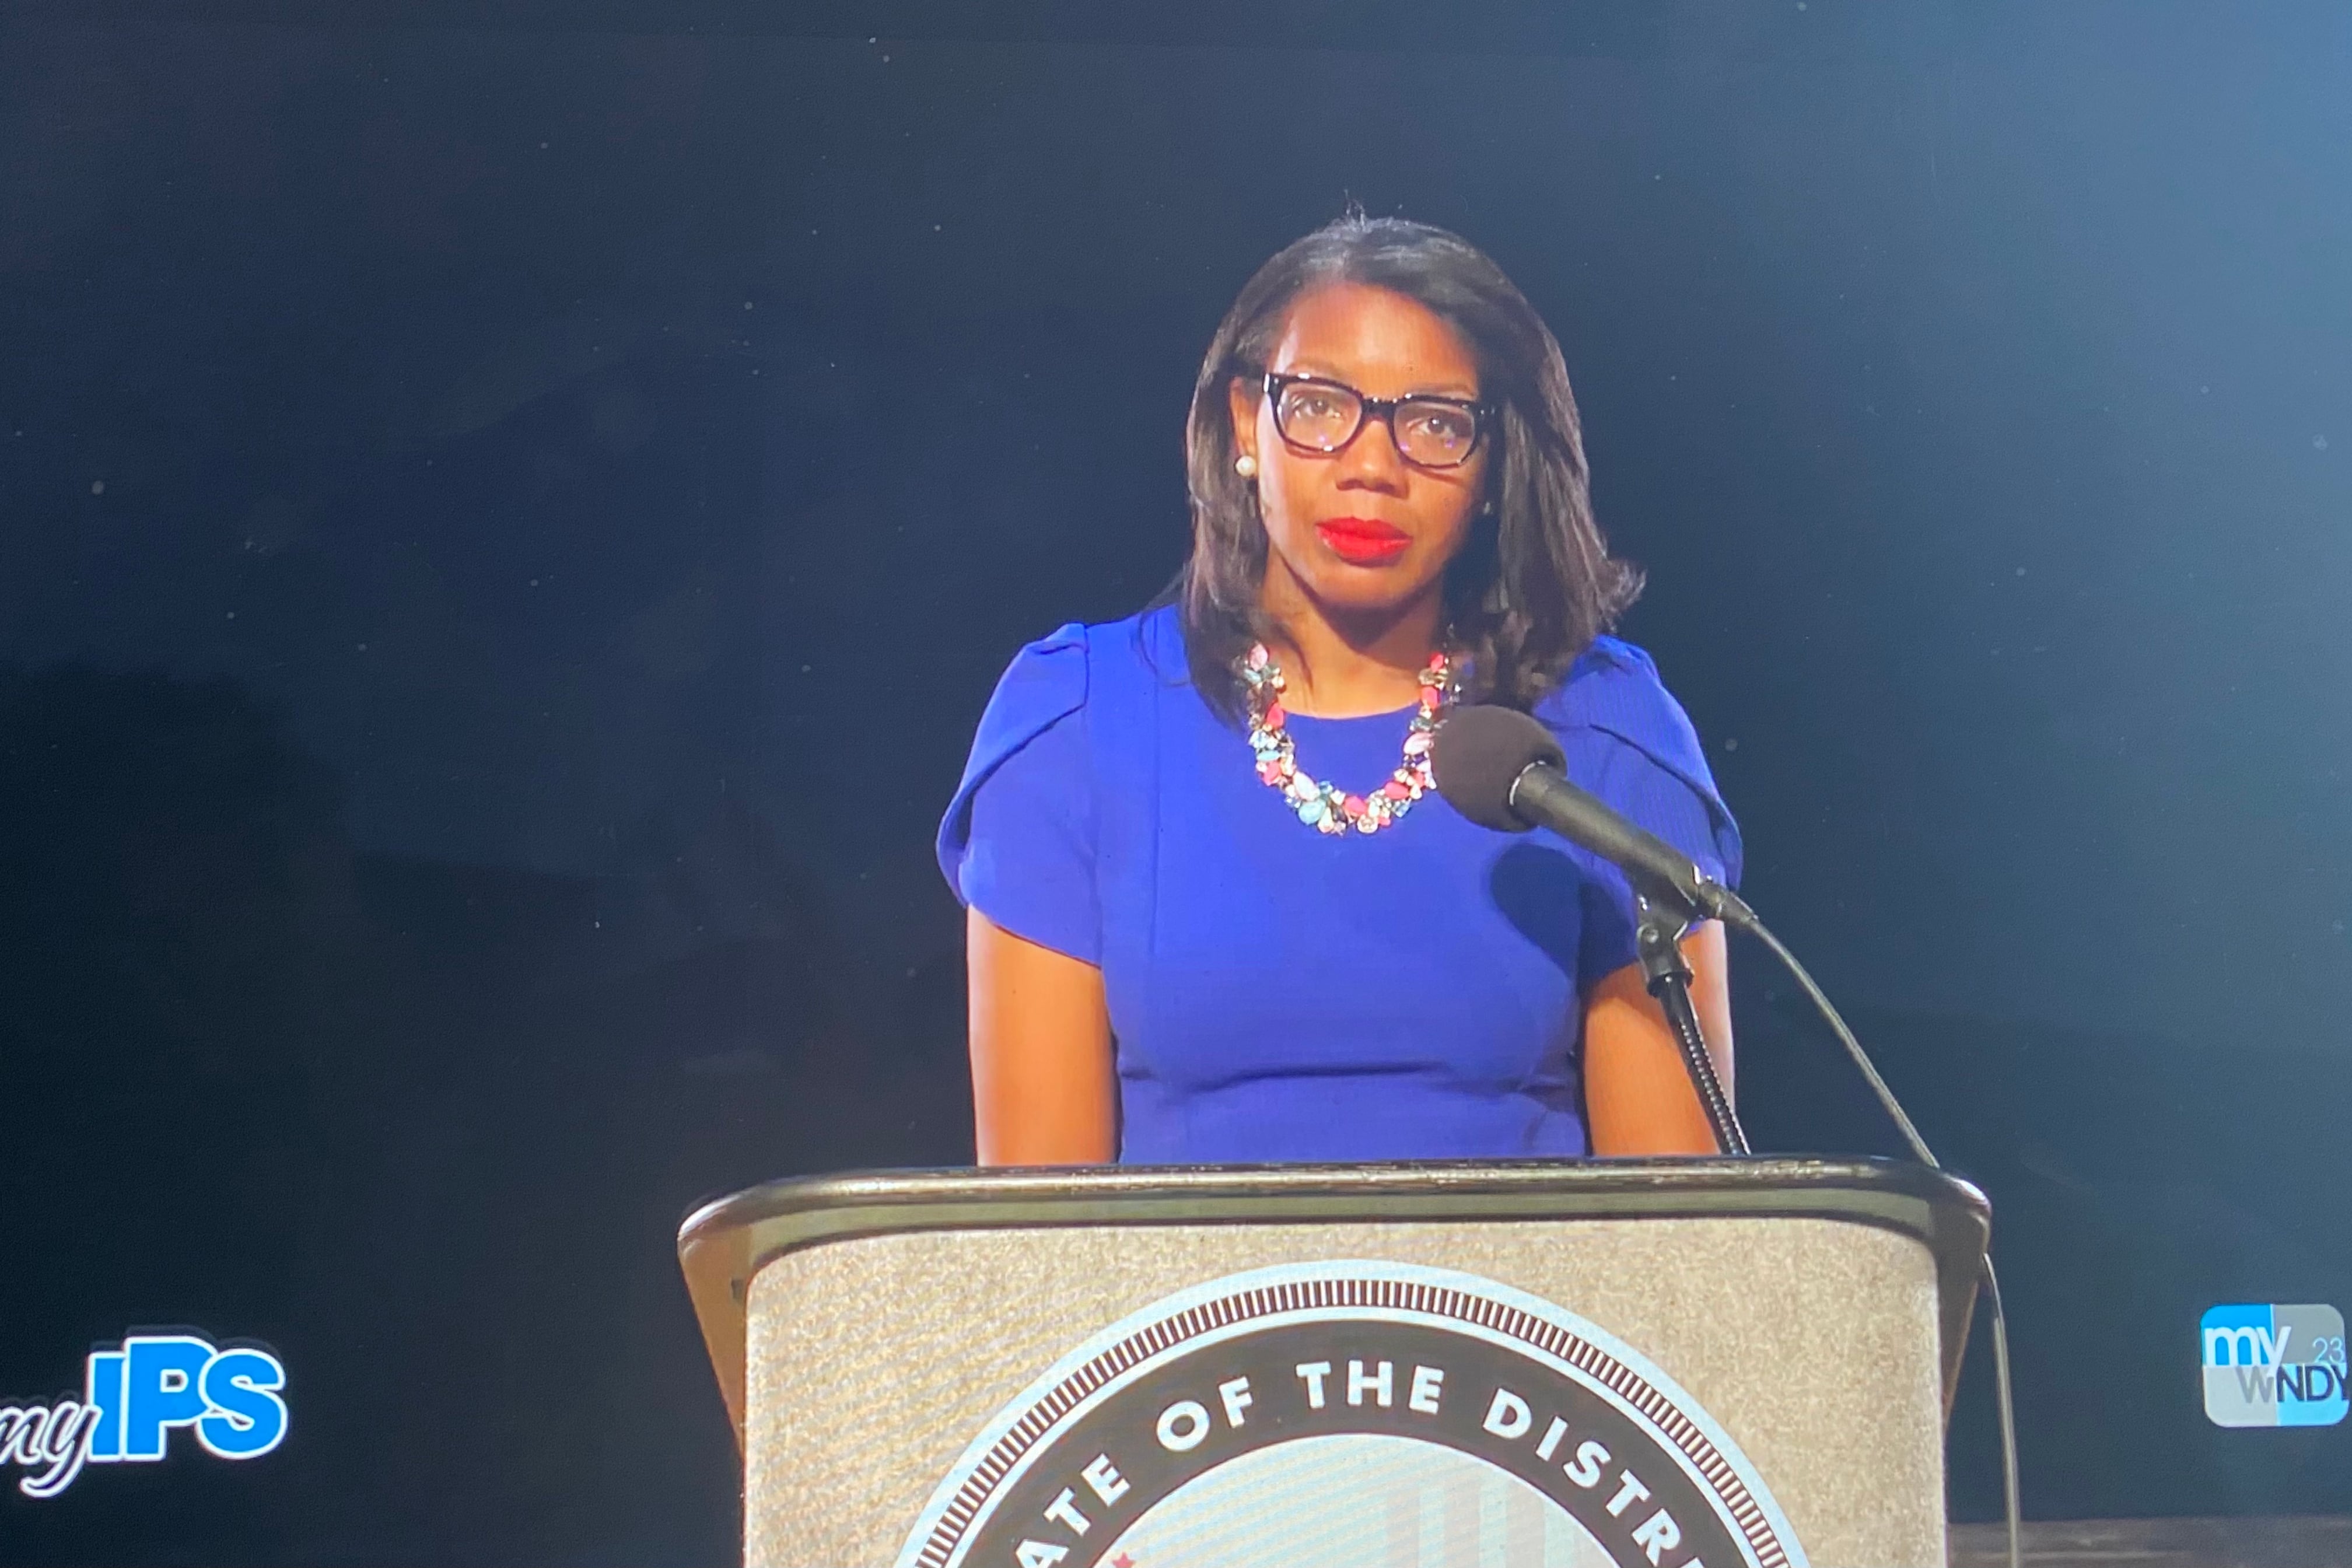 Indianapolis Public Schools Superintendent Aleesia Johnson gives her State of the District address at Crispus Attucks High School on Oct. 29, 2020.